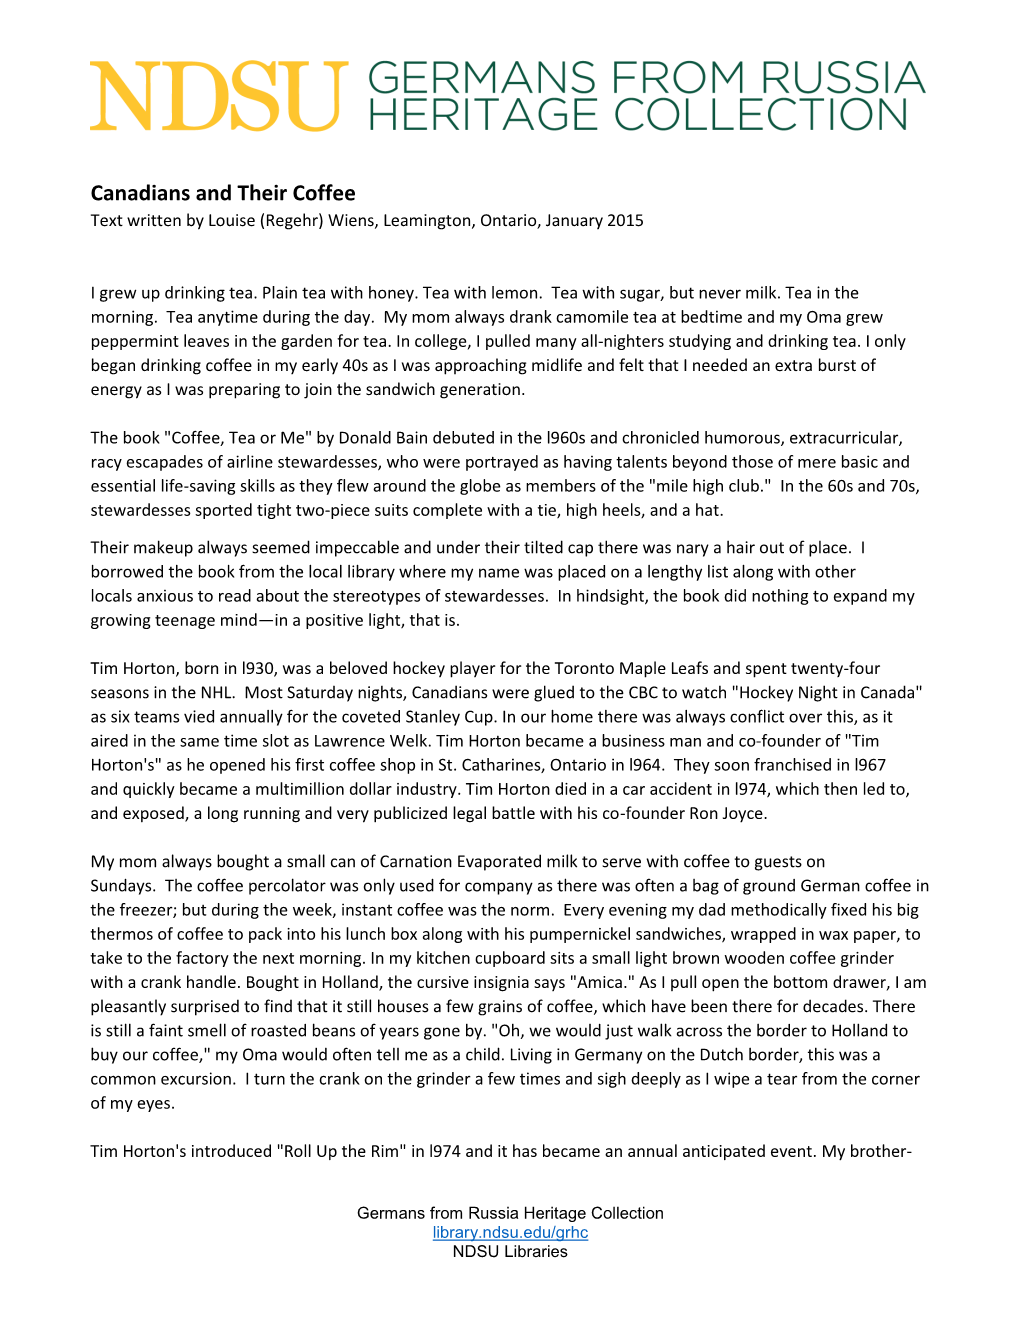 Canadians and Their Coffee Text Written by Louise (Regehr) Wiens, Leamington, Ontario, January 2015